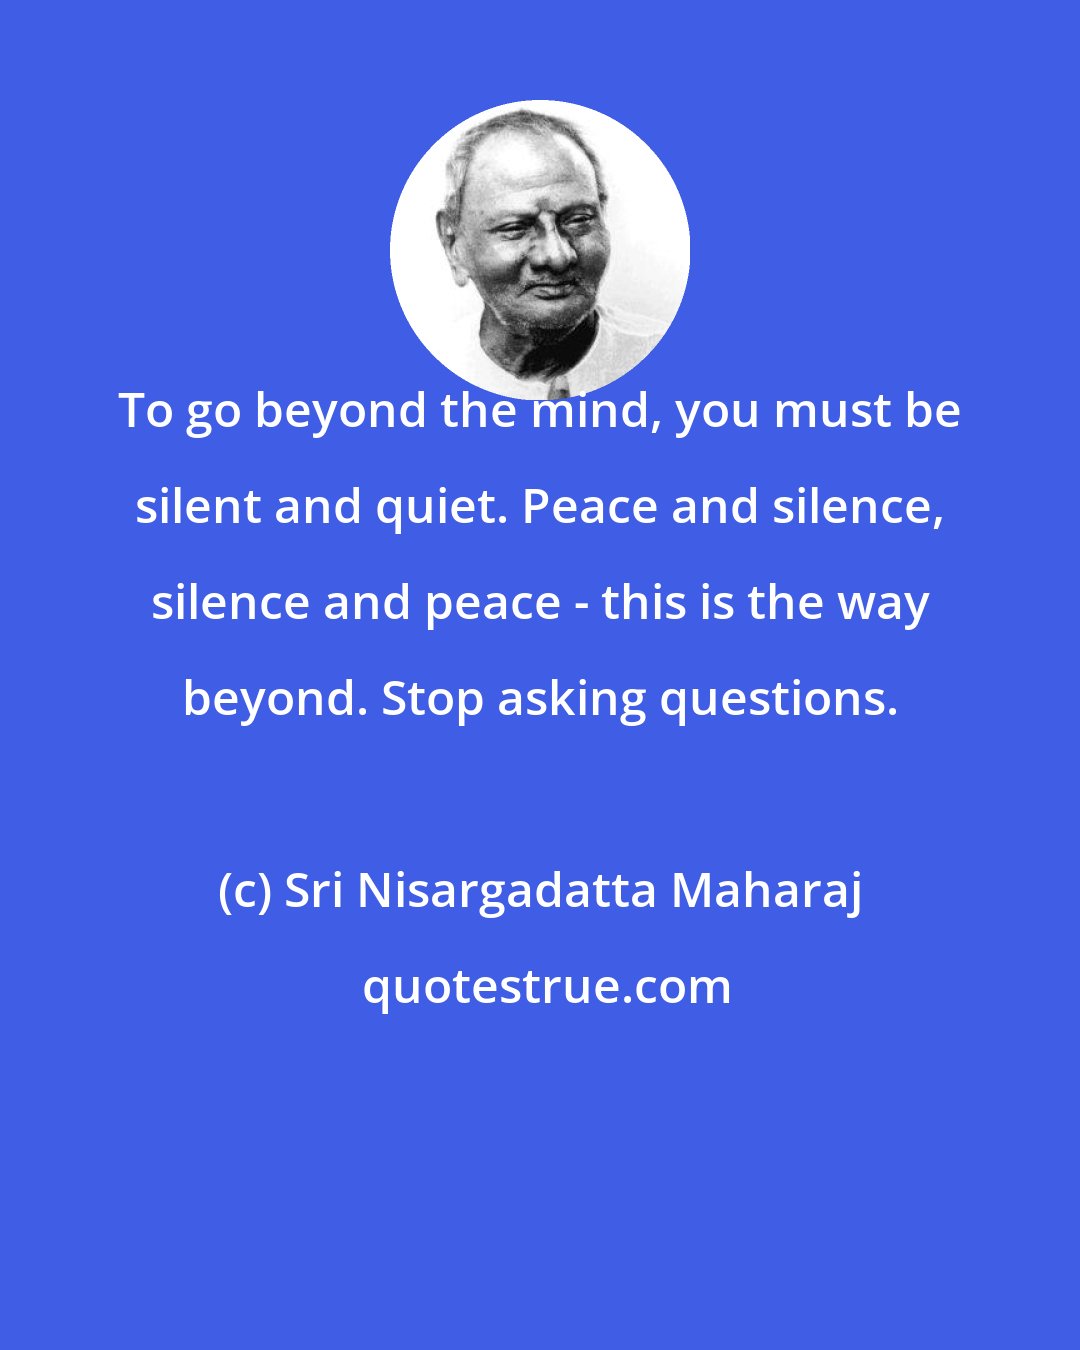 Sri Nisargadatta Maharaj: To go beyond the mind, you must be silent and quiet. Peace and silence, silence and peace - this is the way beyond. Stop asking questions.